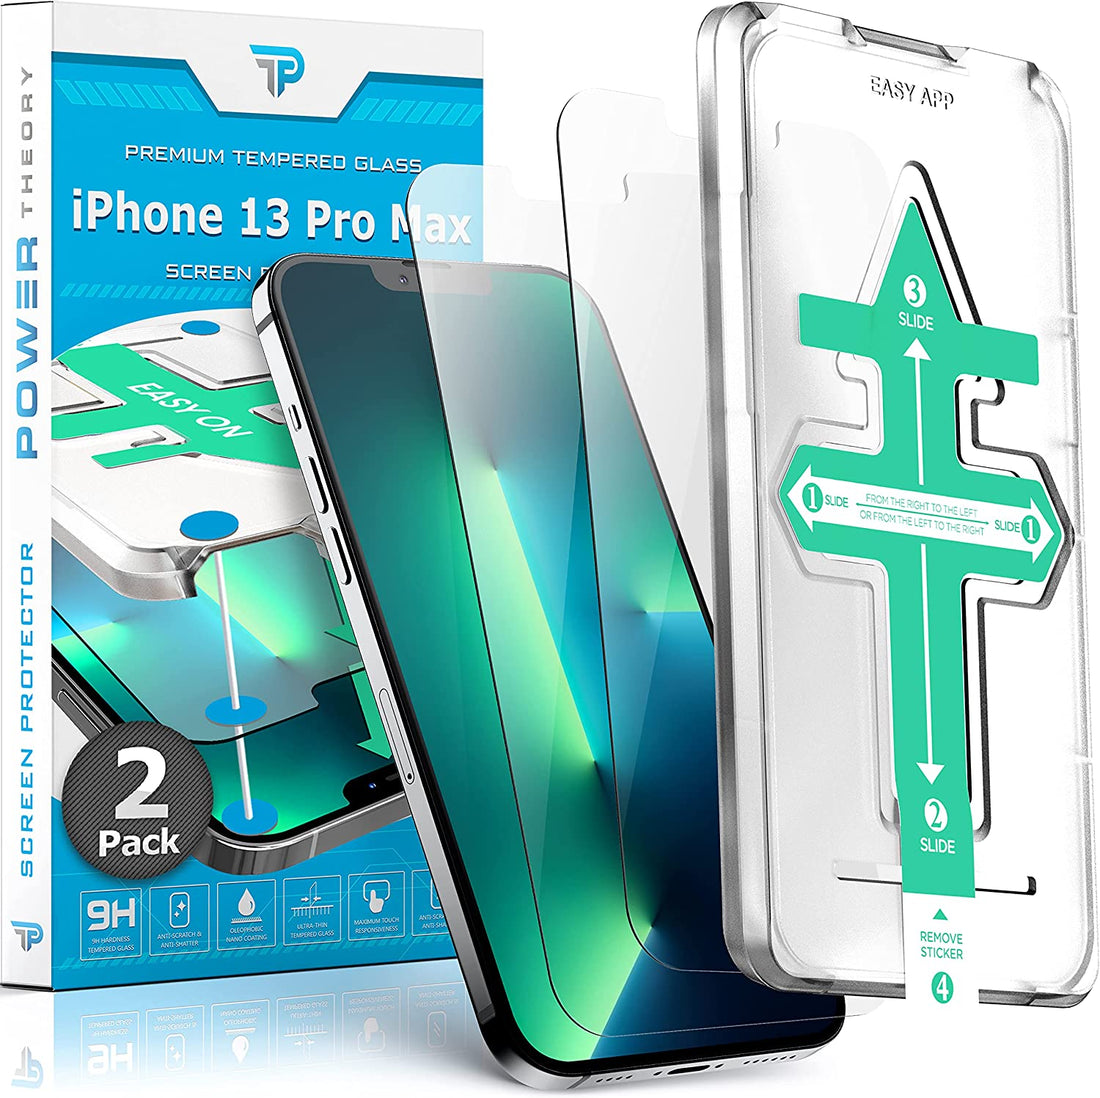 iPhone 13 Pro Max Tempered Glass Screen Protector [2-Pack] Preview #1